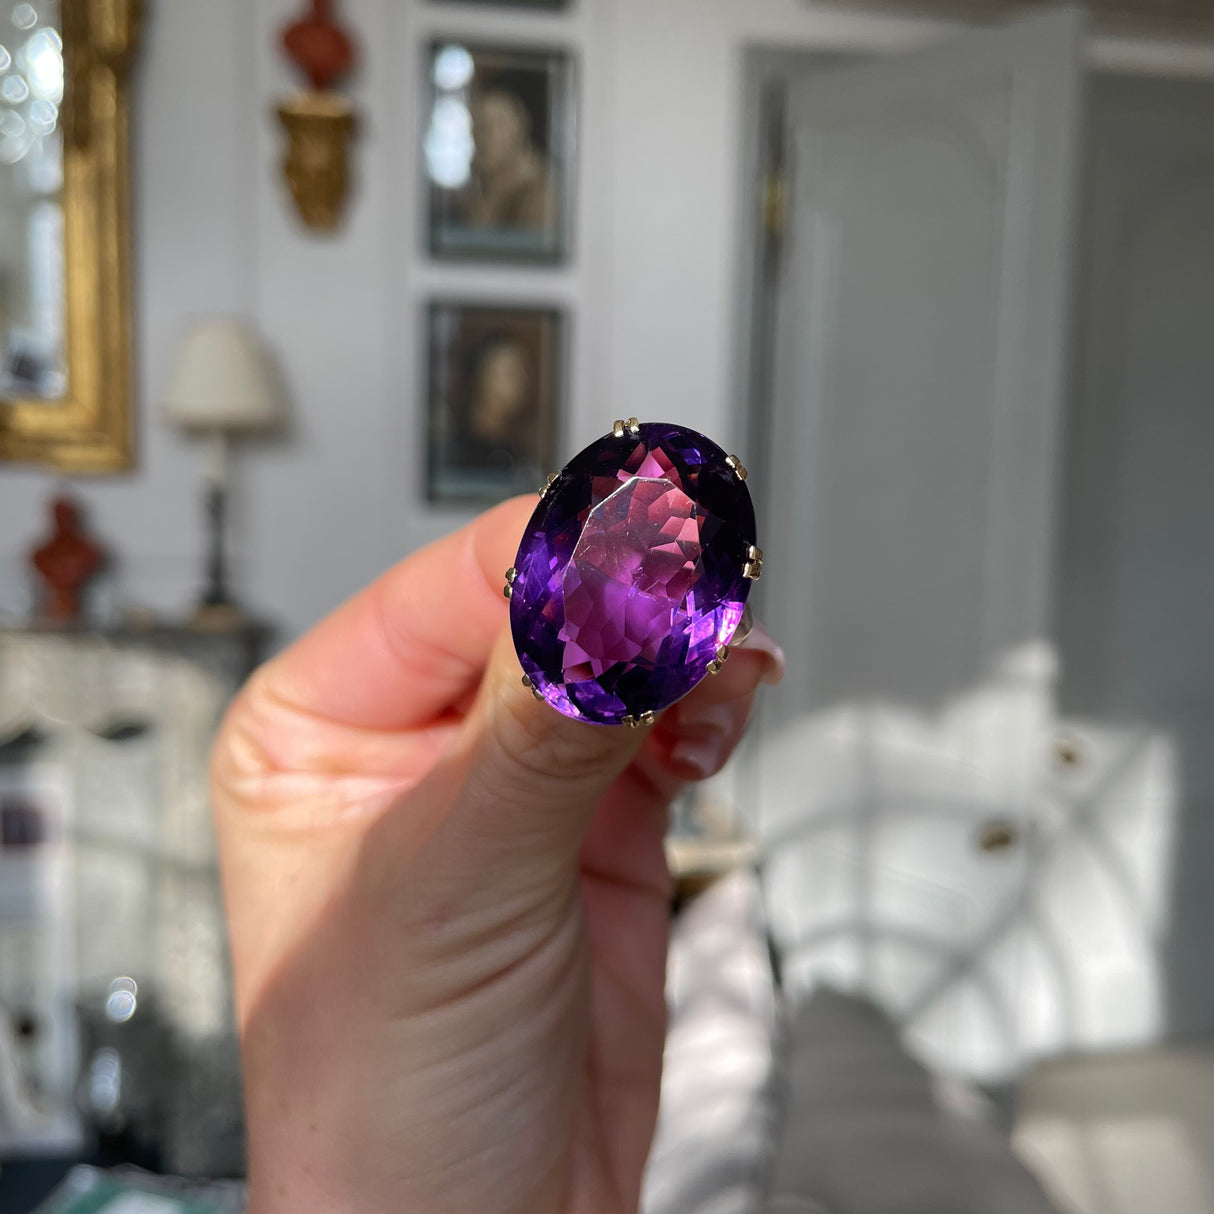 Victorian amethyst cocktail ring, held in fingers.